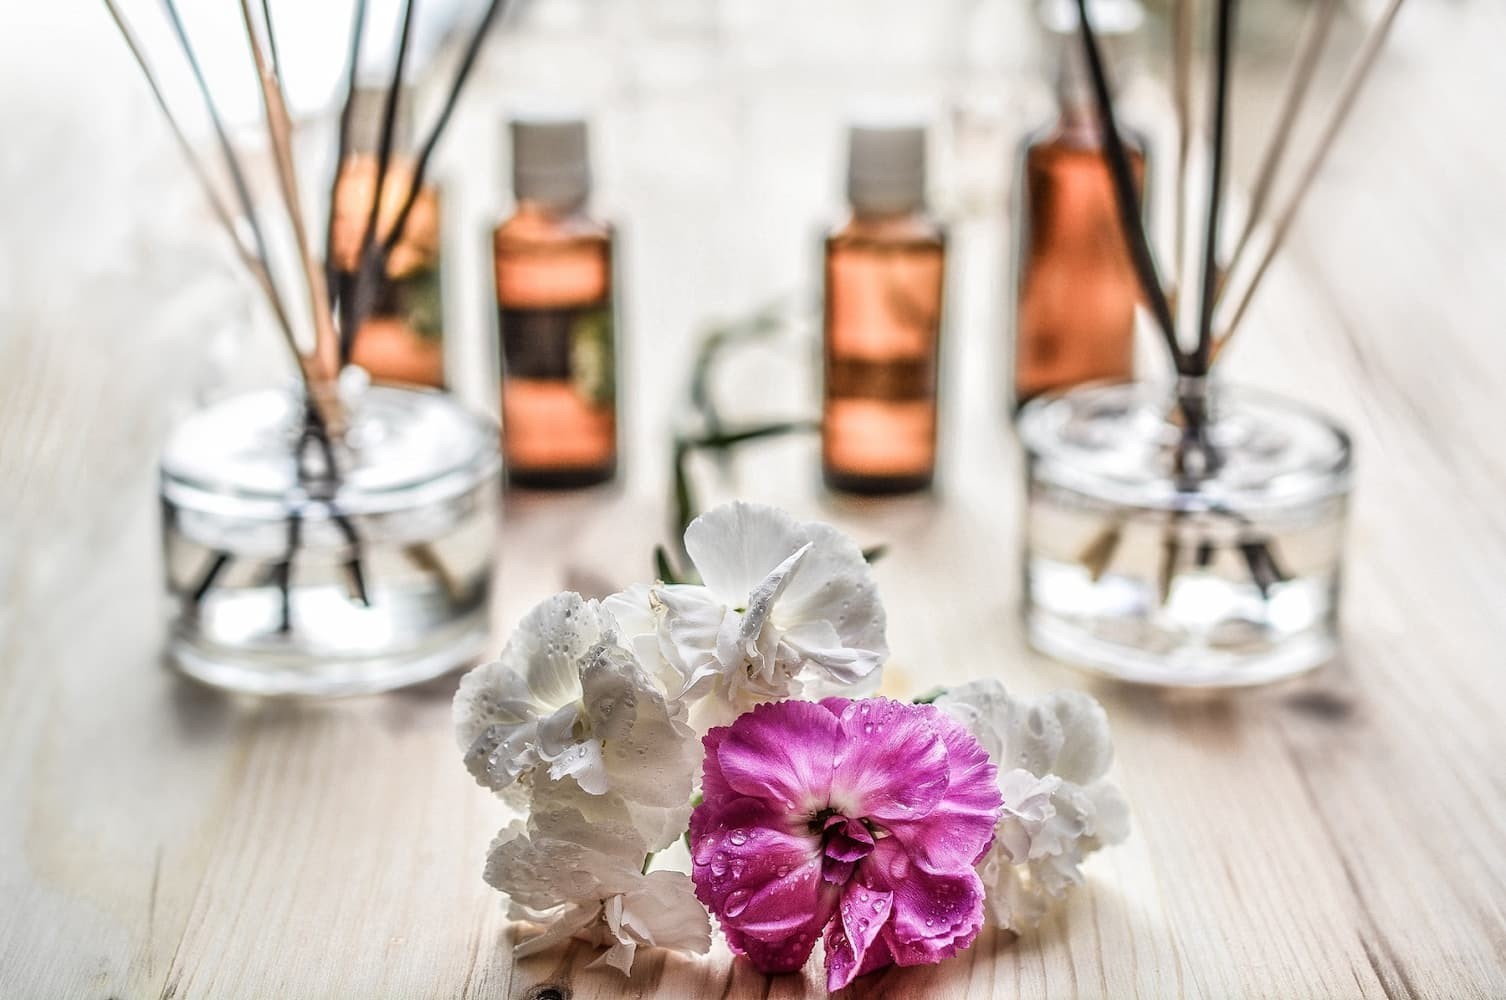 Hair Loss and Aromatherapy: What You Need to Know